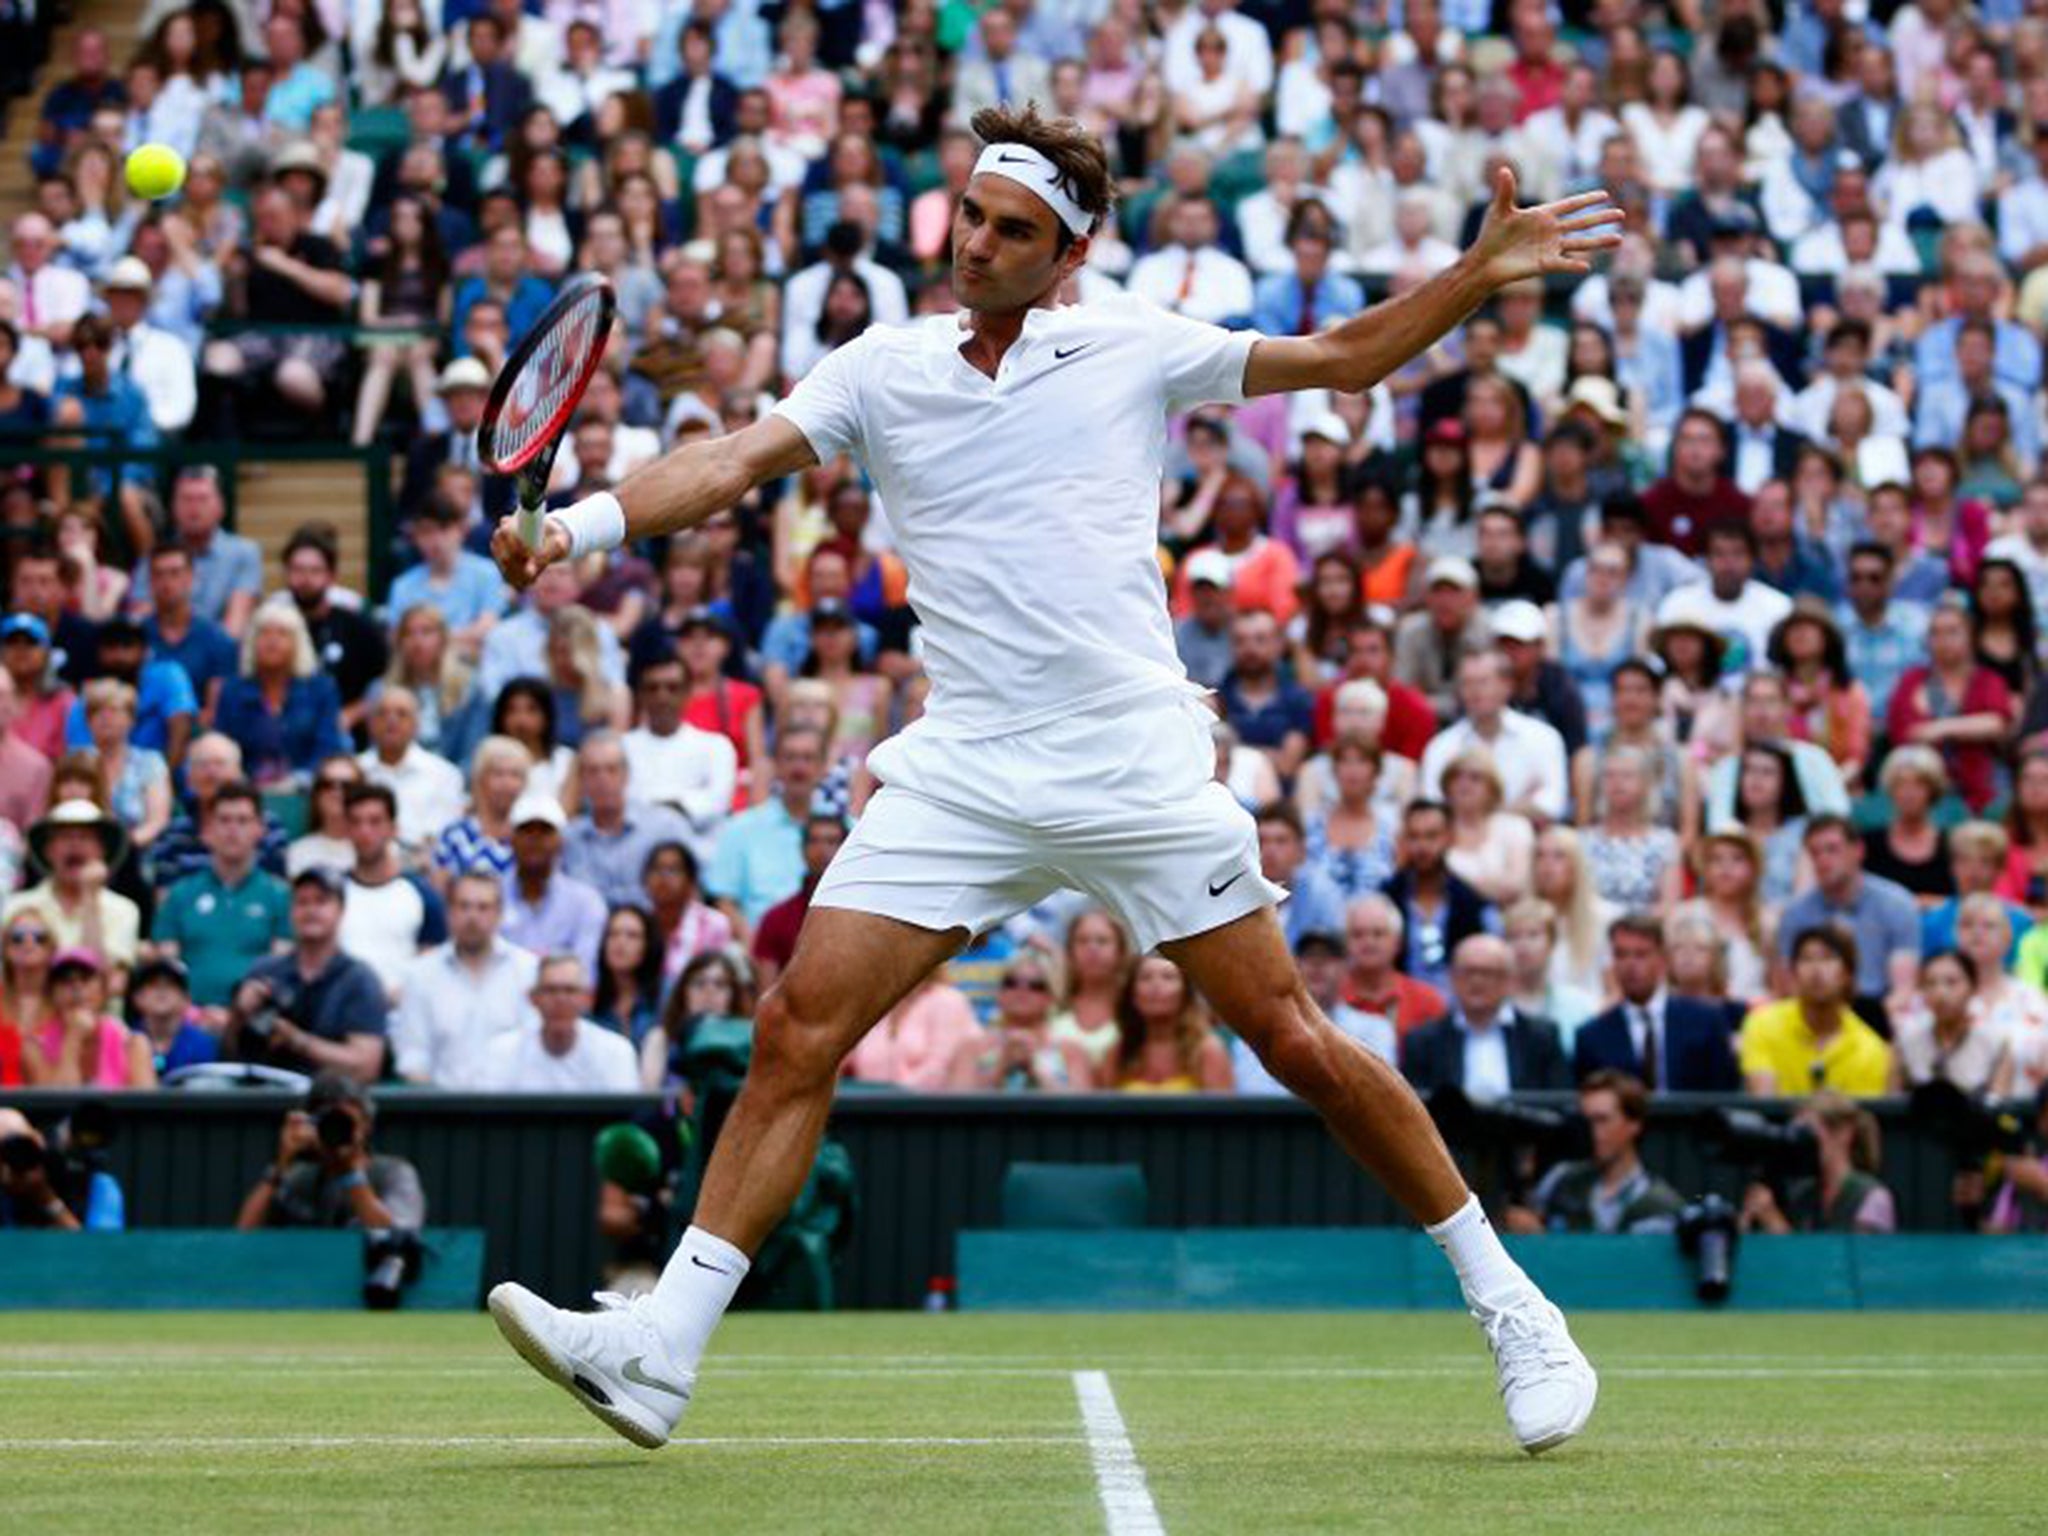 Roger Federer was in complete control throughout his three-set victory over Bautista Agut